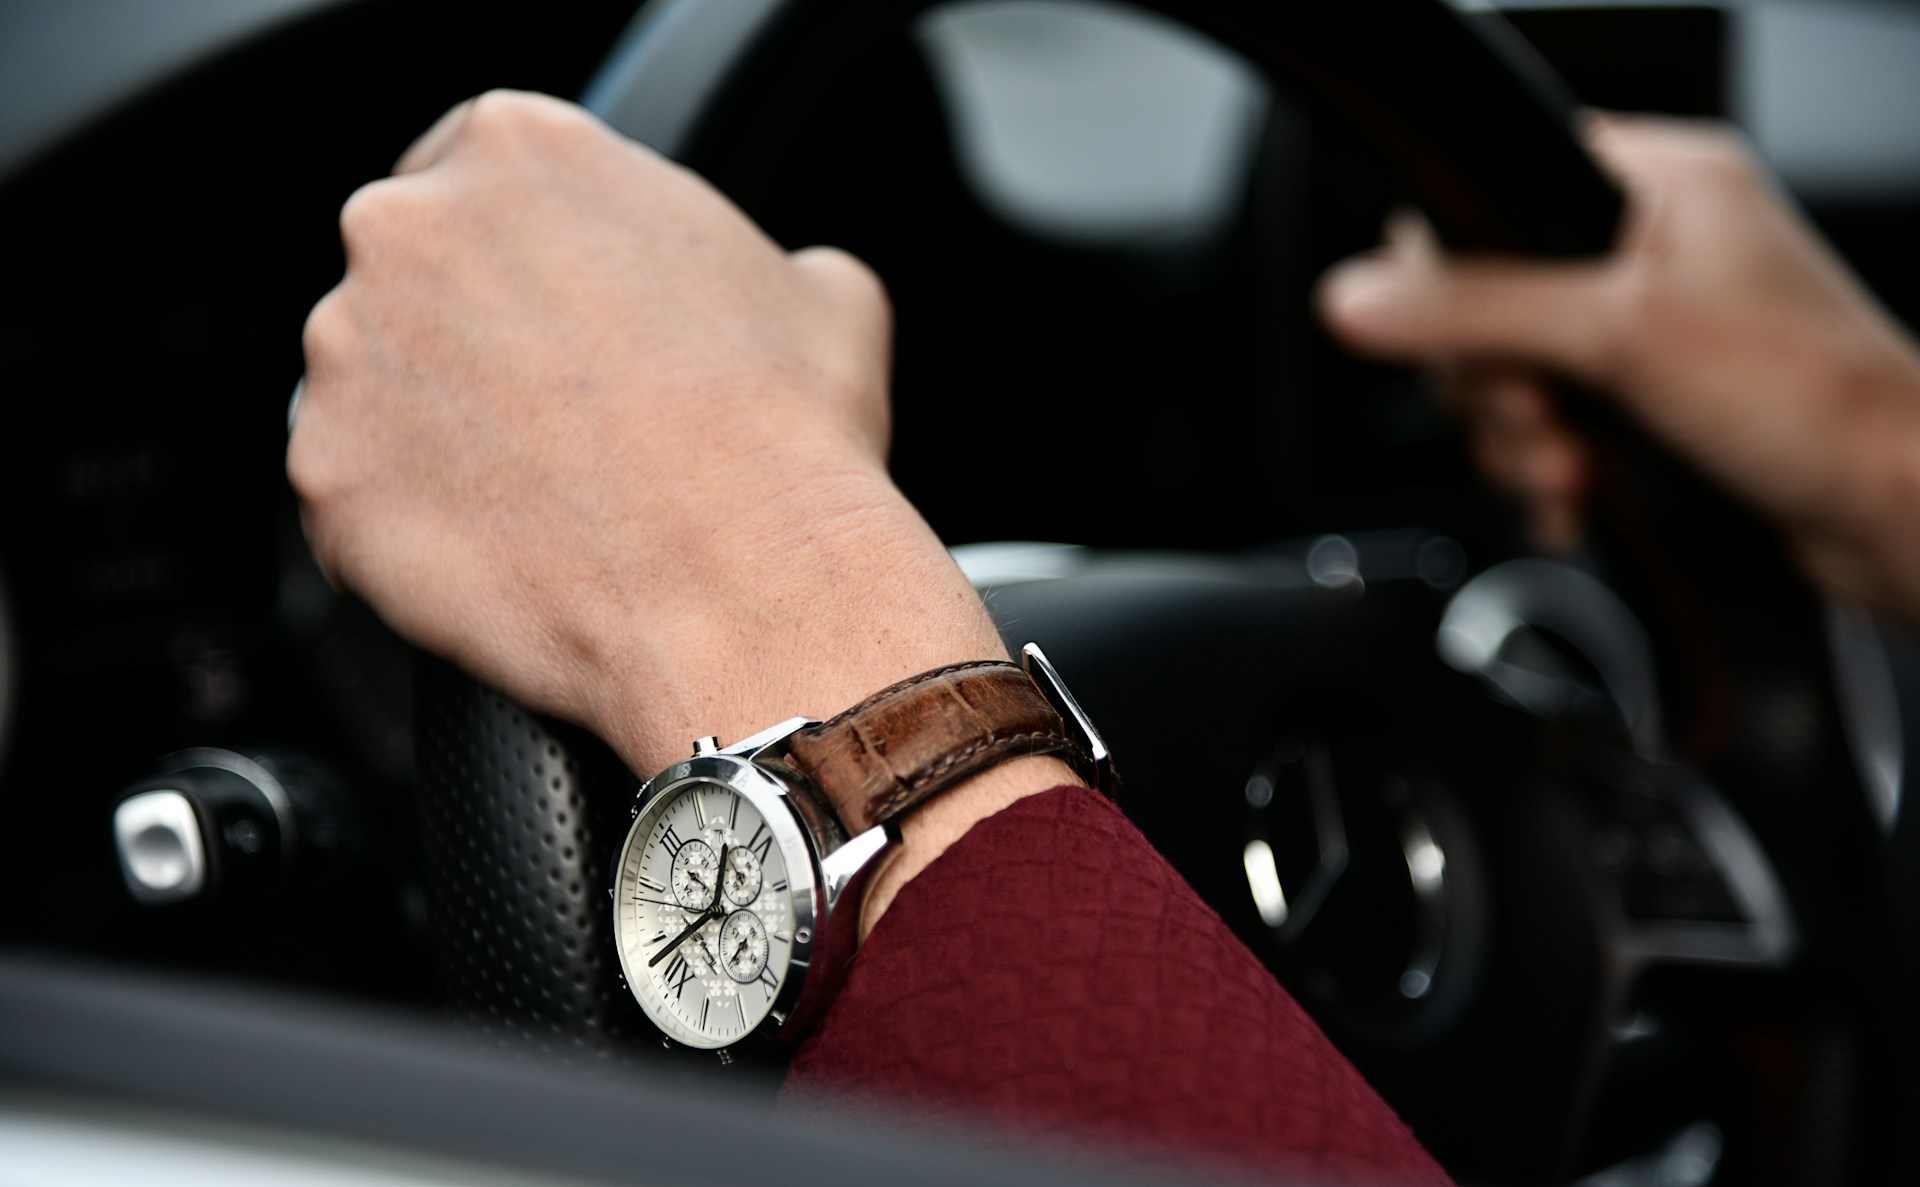 a close-up of a man’s hands holding a steering wheel, one wrist wearing a luxury watch